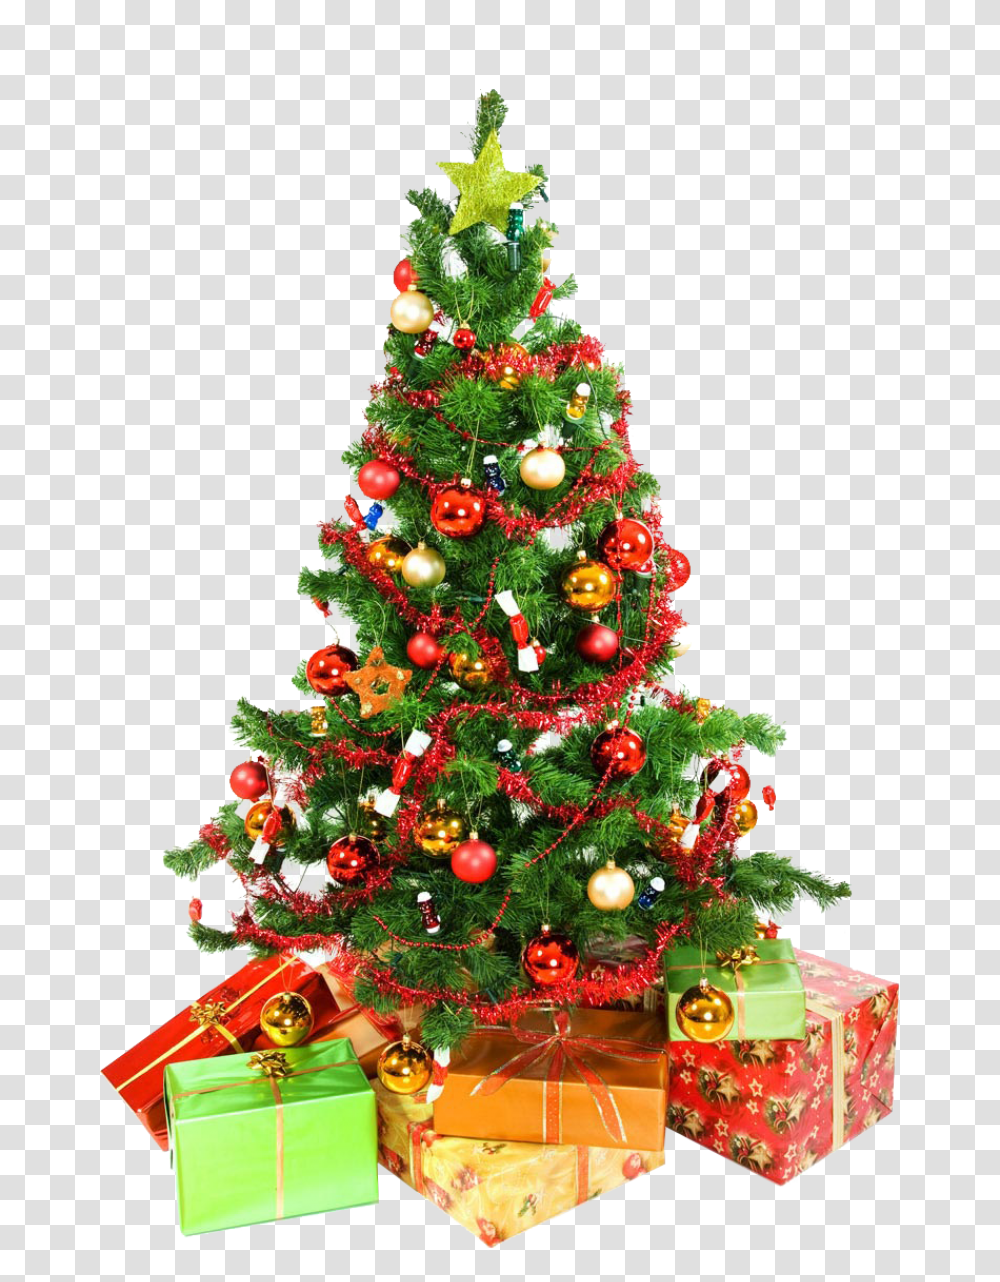 Download Christmas Tree Presents Underneath Image For Free Christmas Tree High Resolution, Ornament, Plant Transparent Png